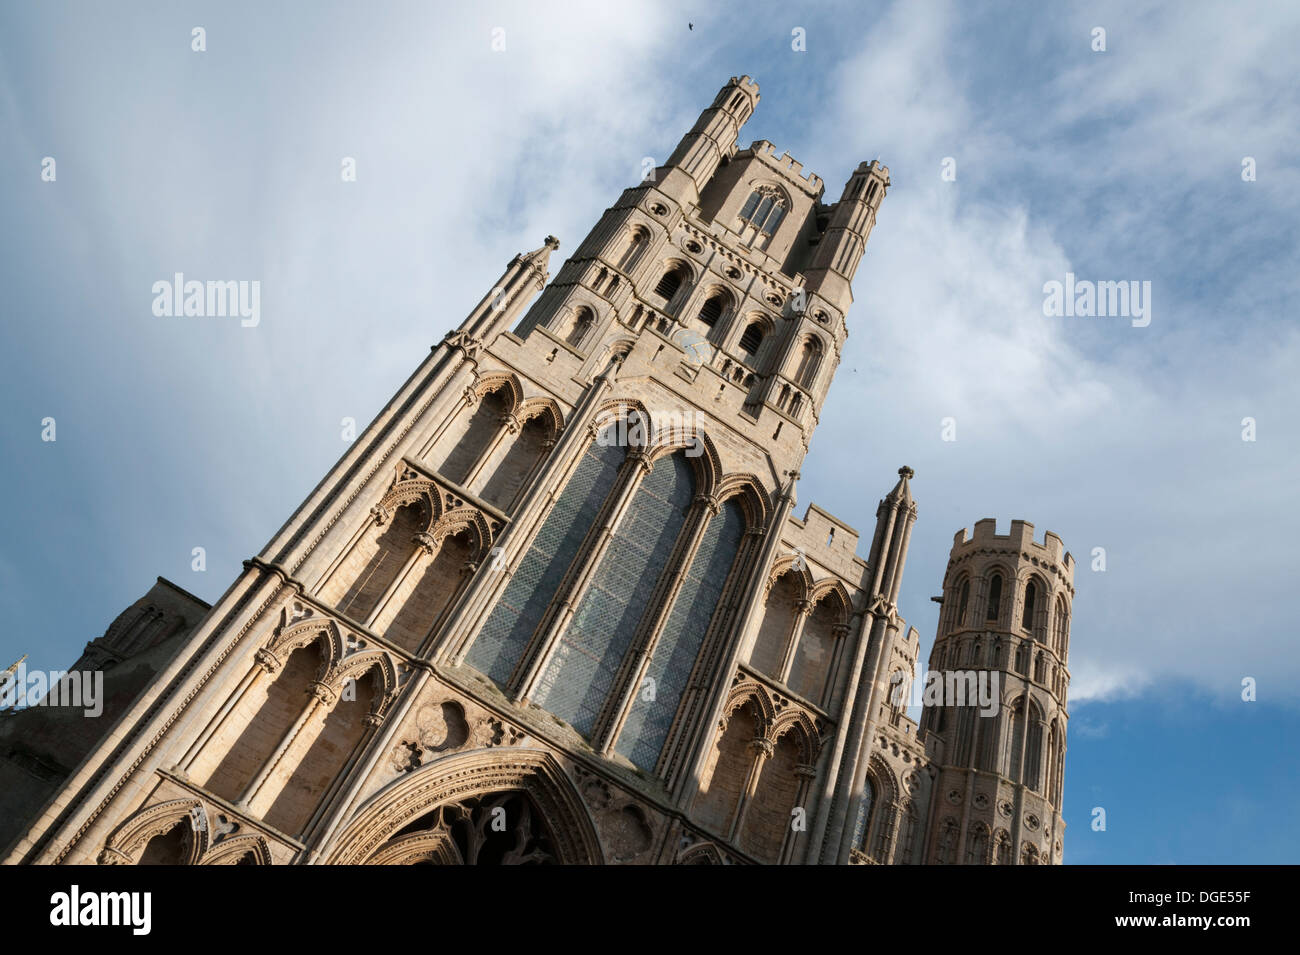 Detail of one the towers on Ely Cathedral UK Stock Photo